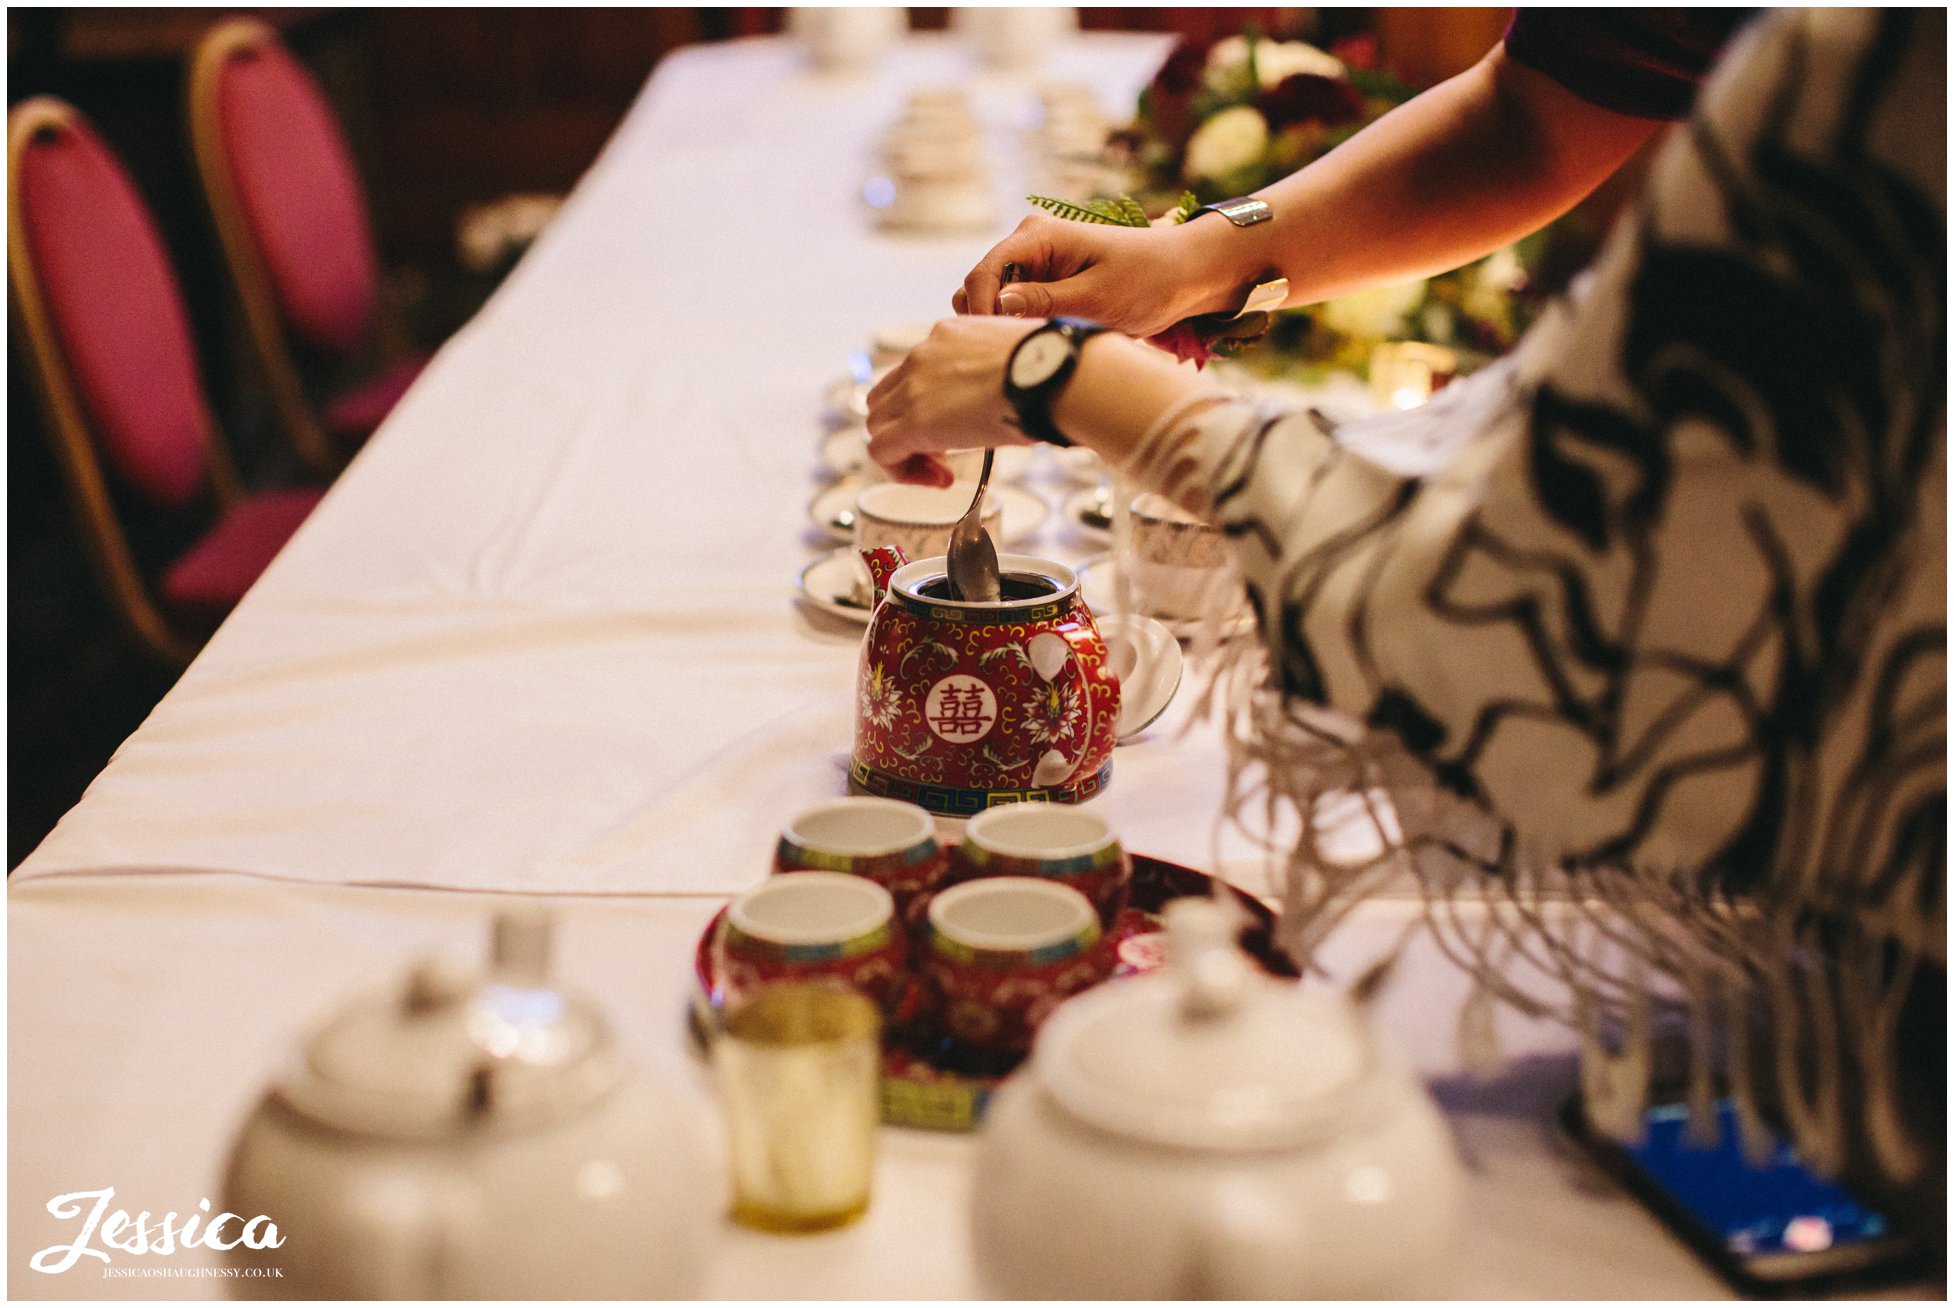 Chinese tea is prepared for the tea ceremony